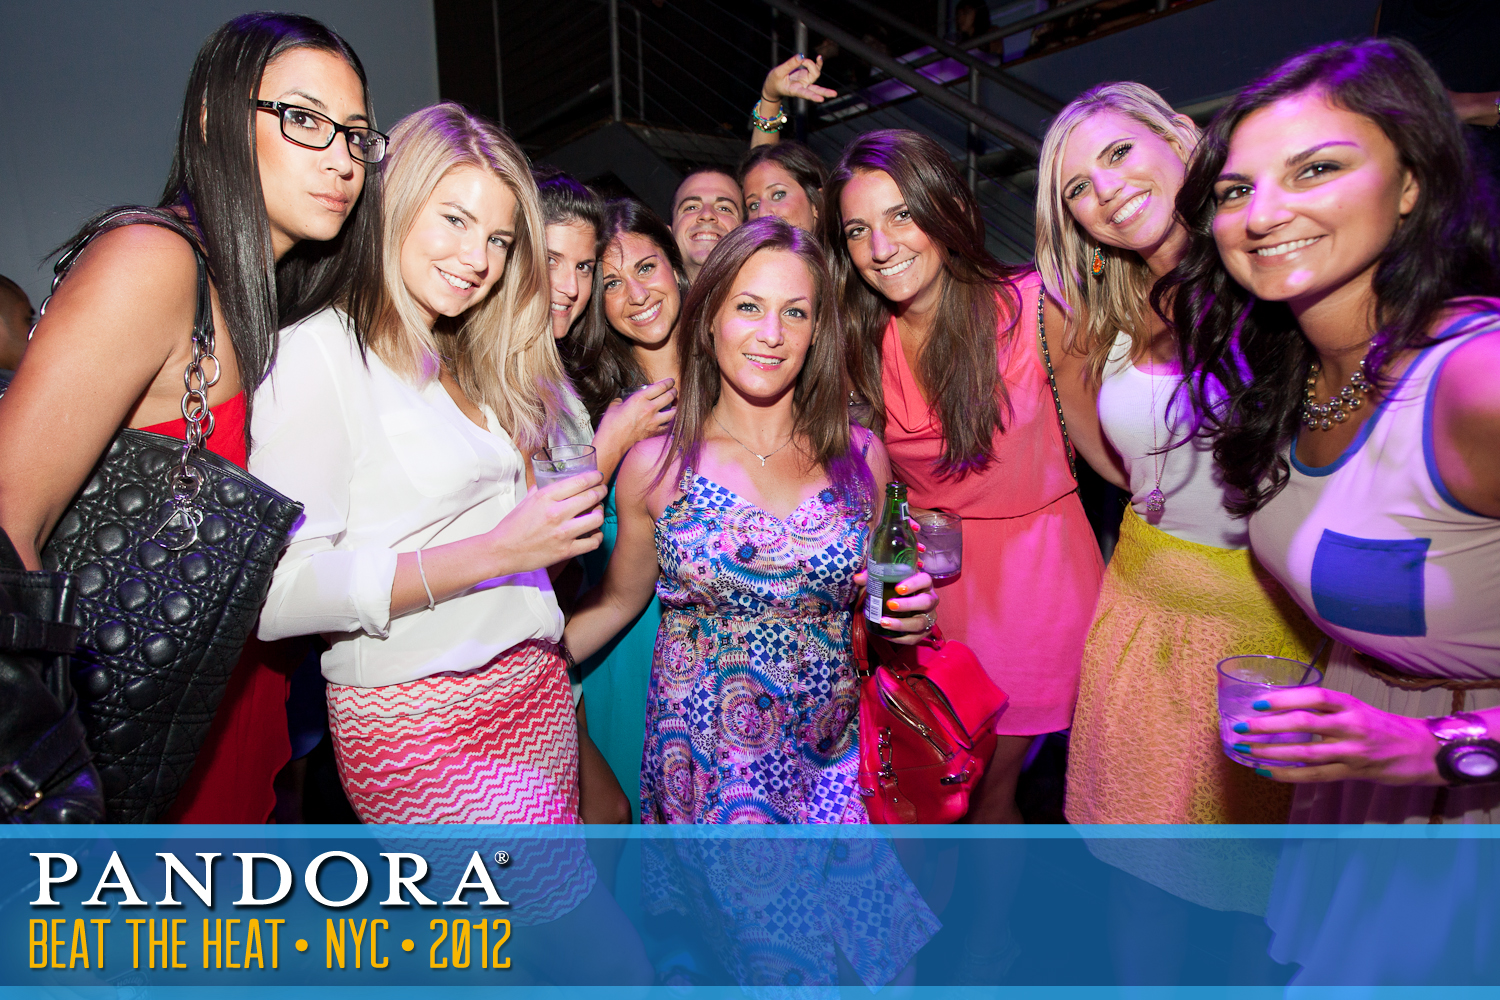 Pandora’s Beat The Heat party at Arena on June 21, 2012